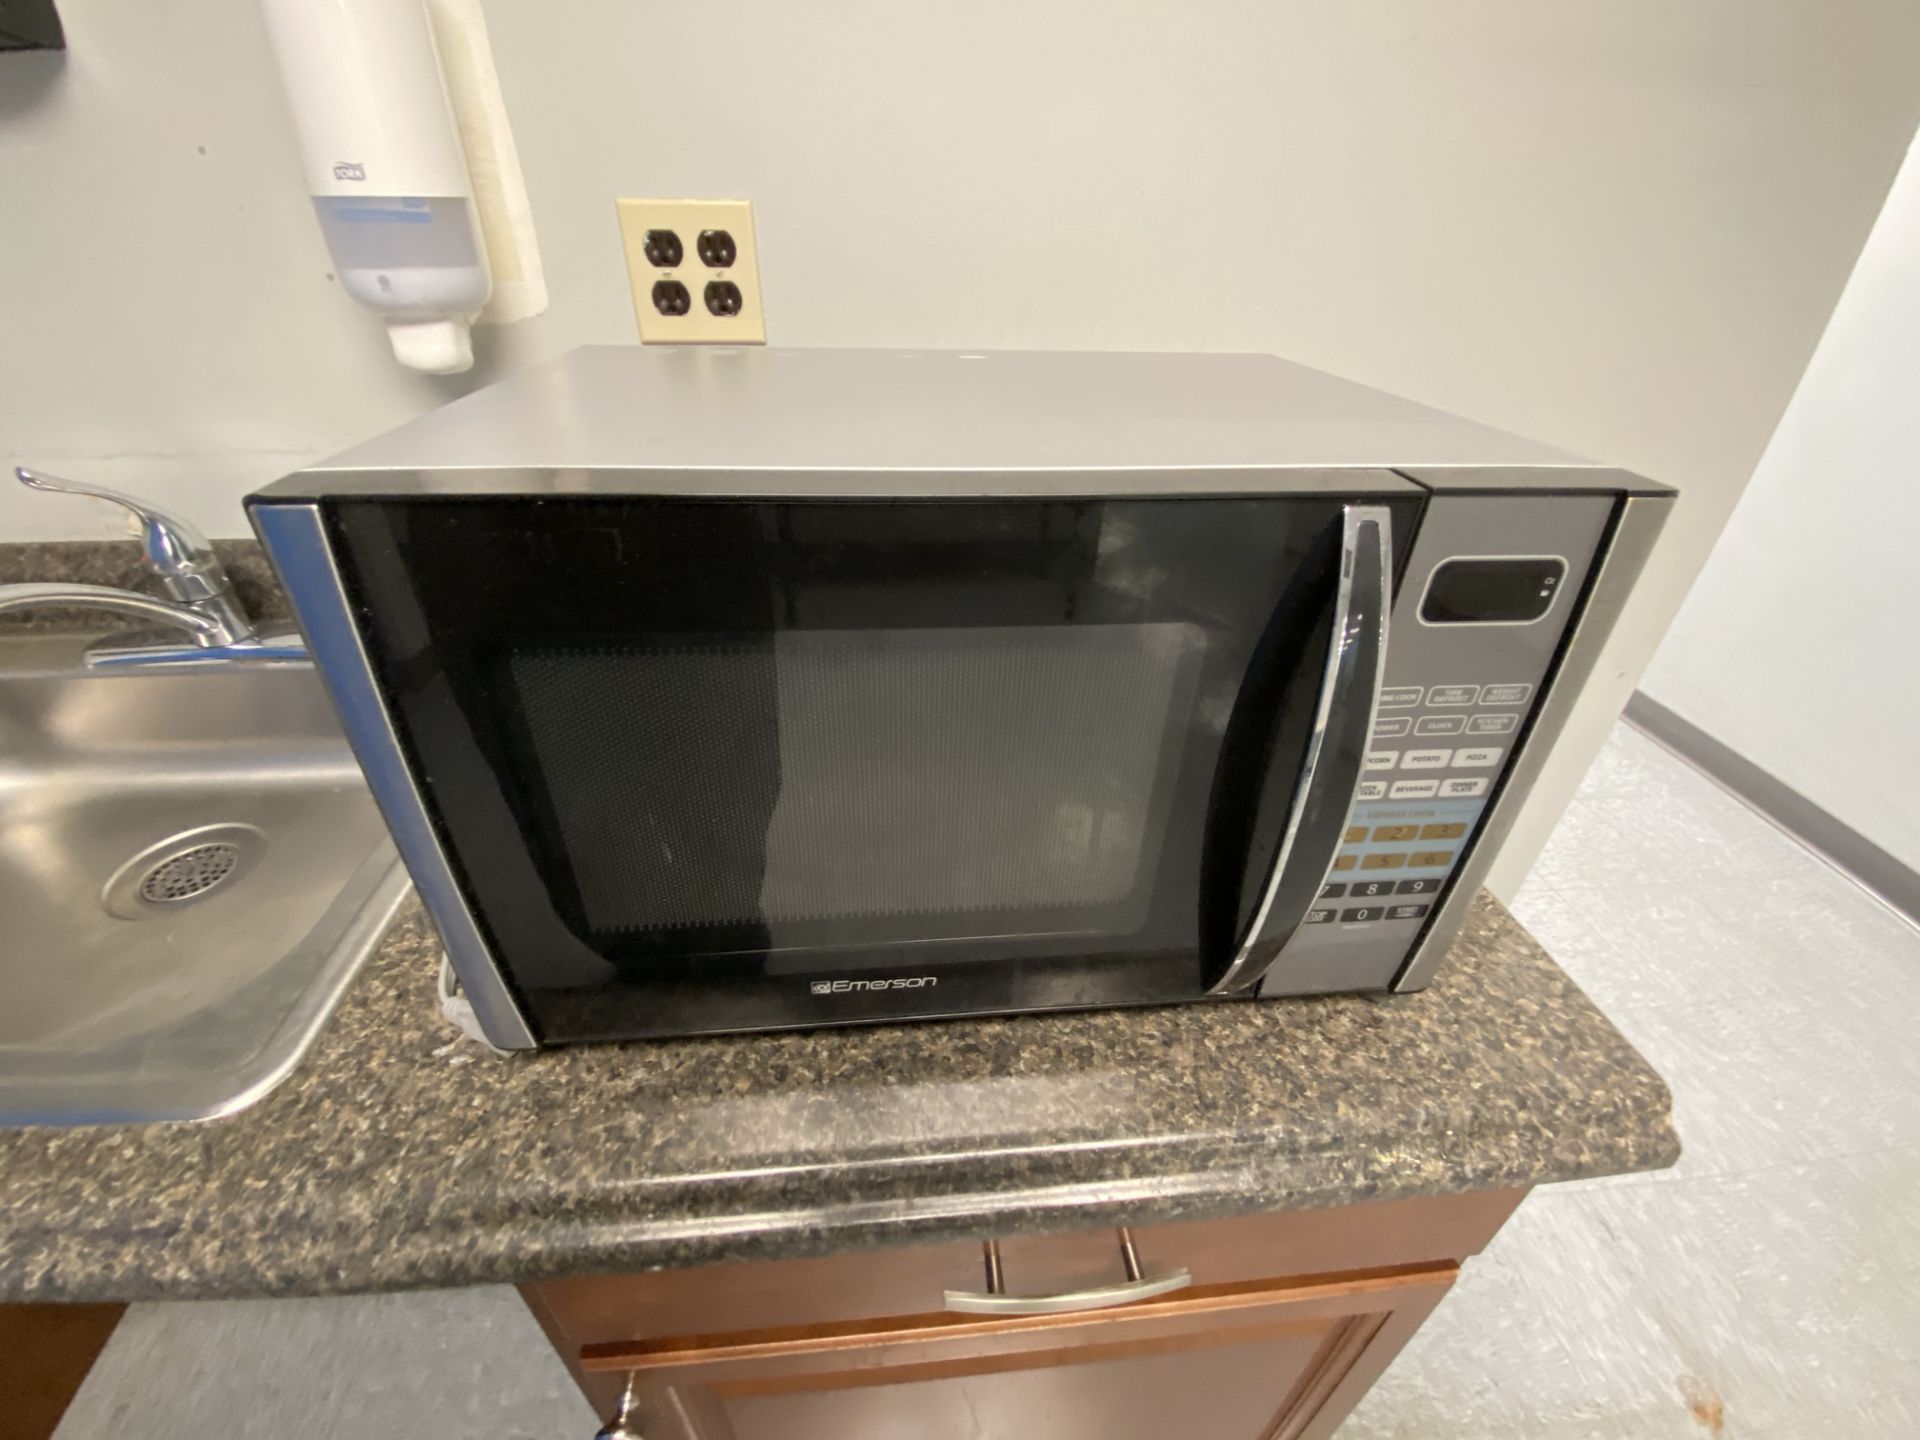 Emmerson 900W microwave